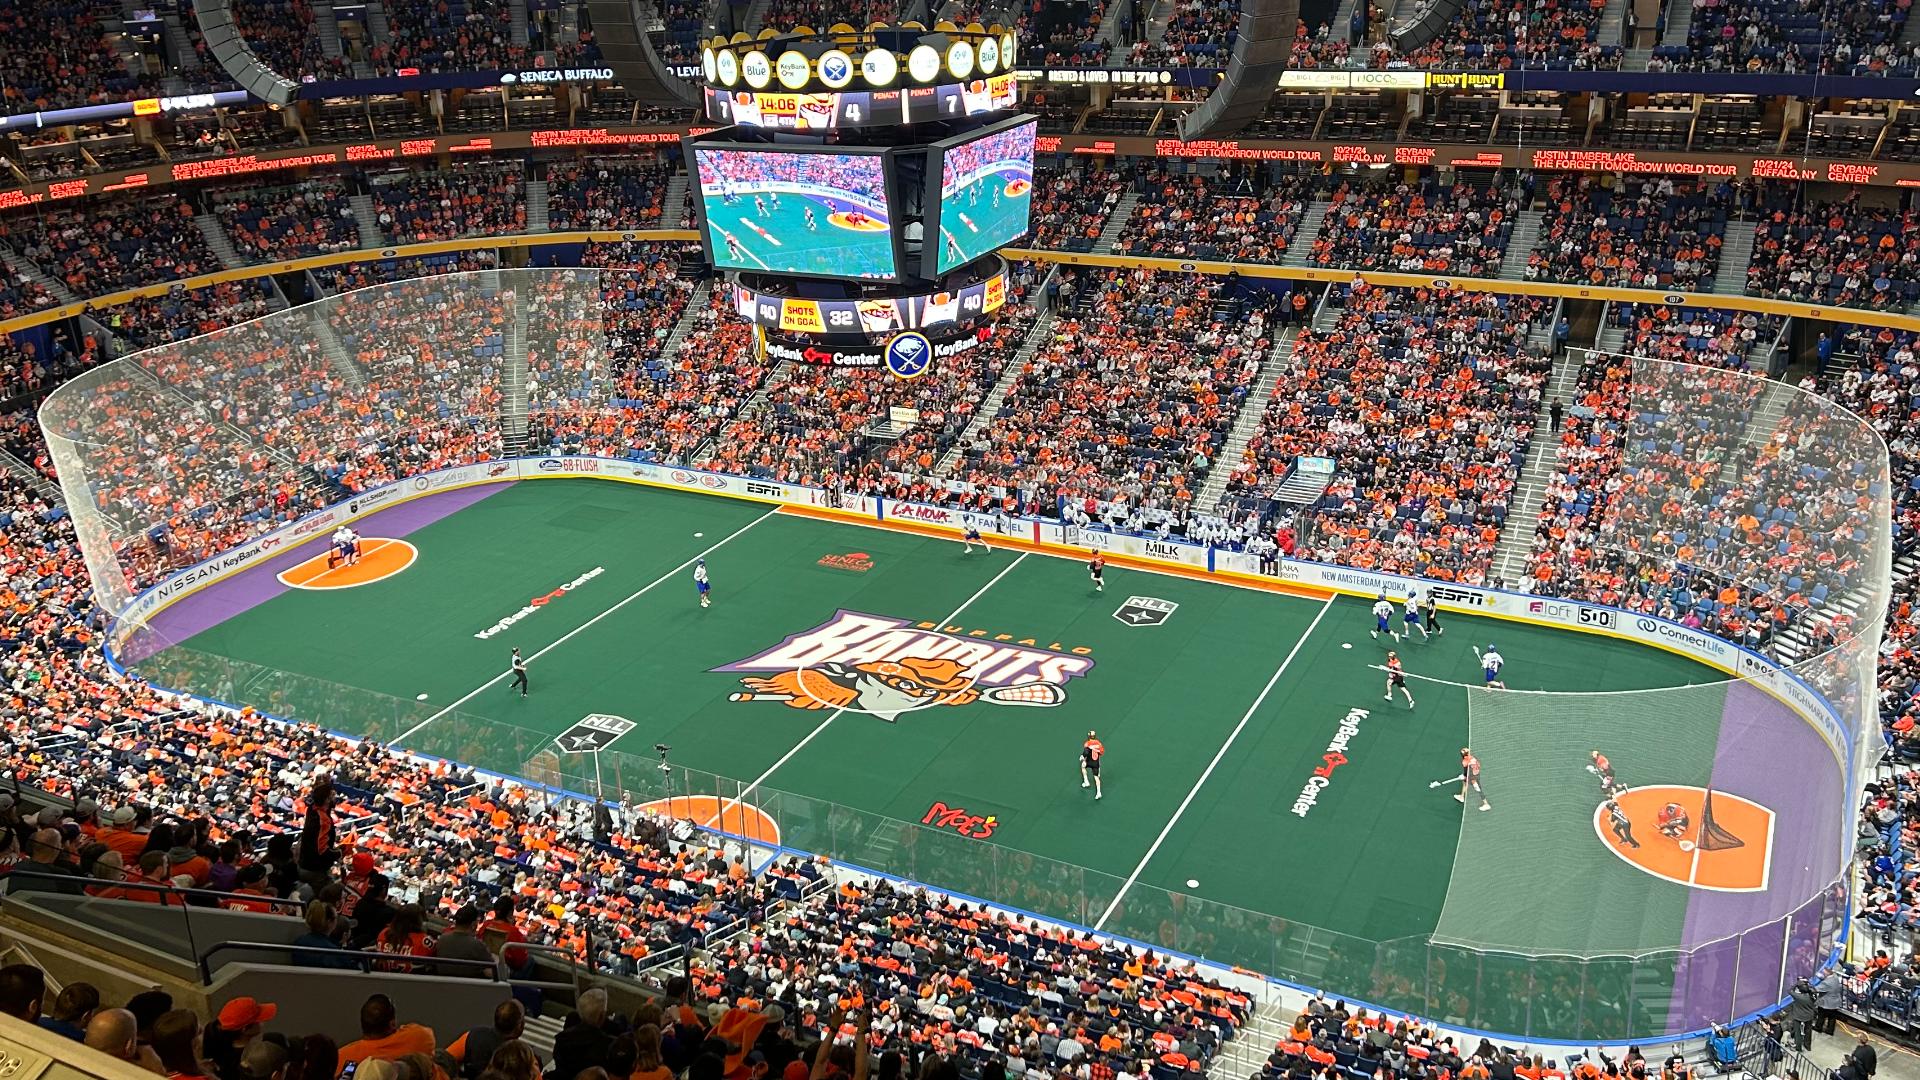 Bandits fans went wild during a KeyBank Center comeback that pushed Buffalo back into the National Lacrosse League finals for the third straight season.